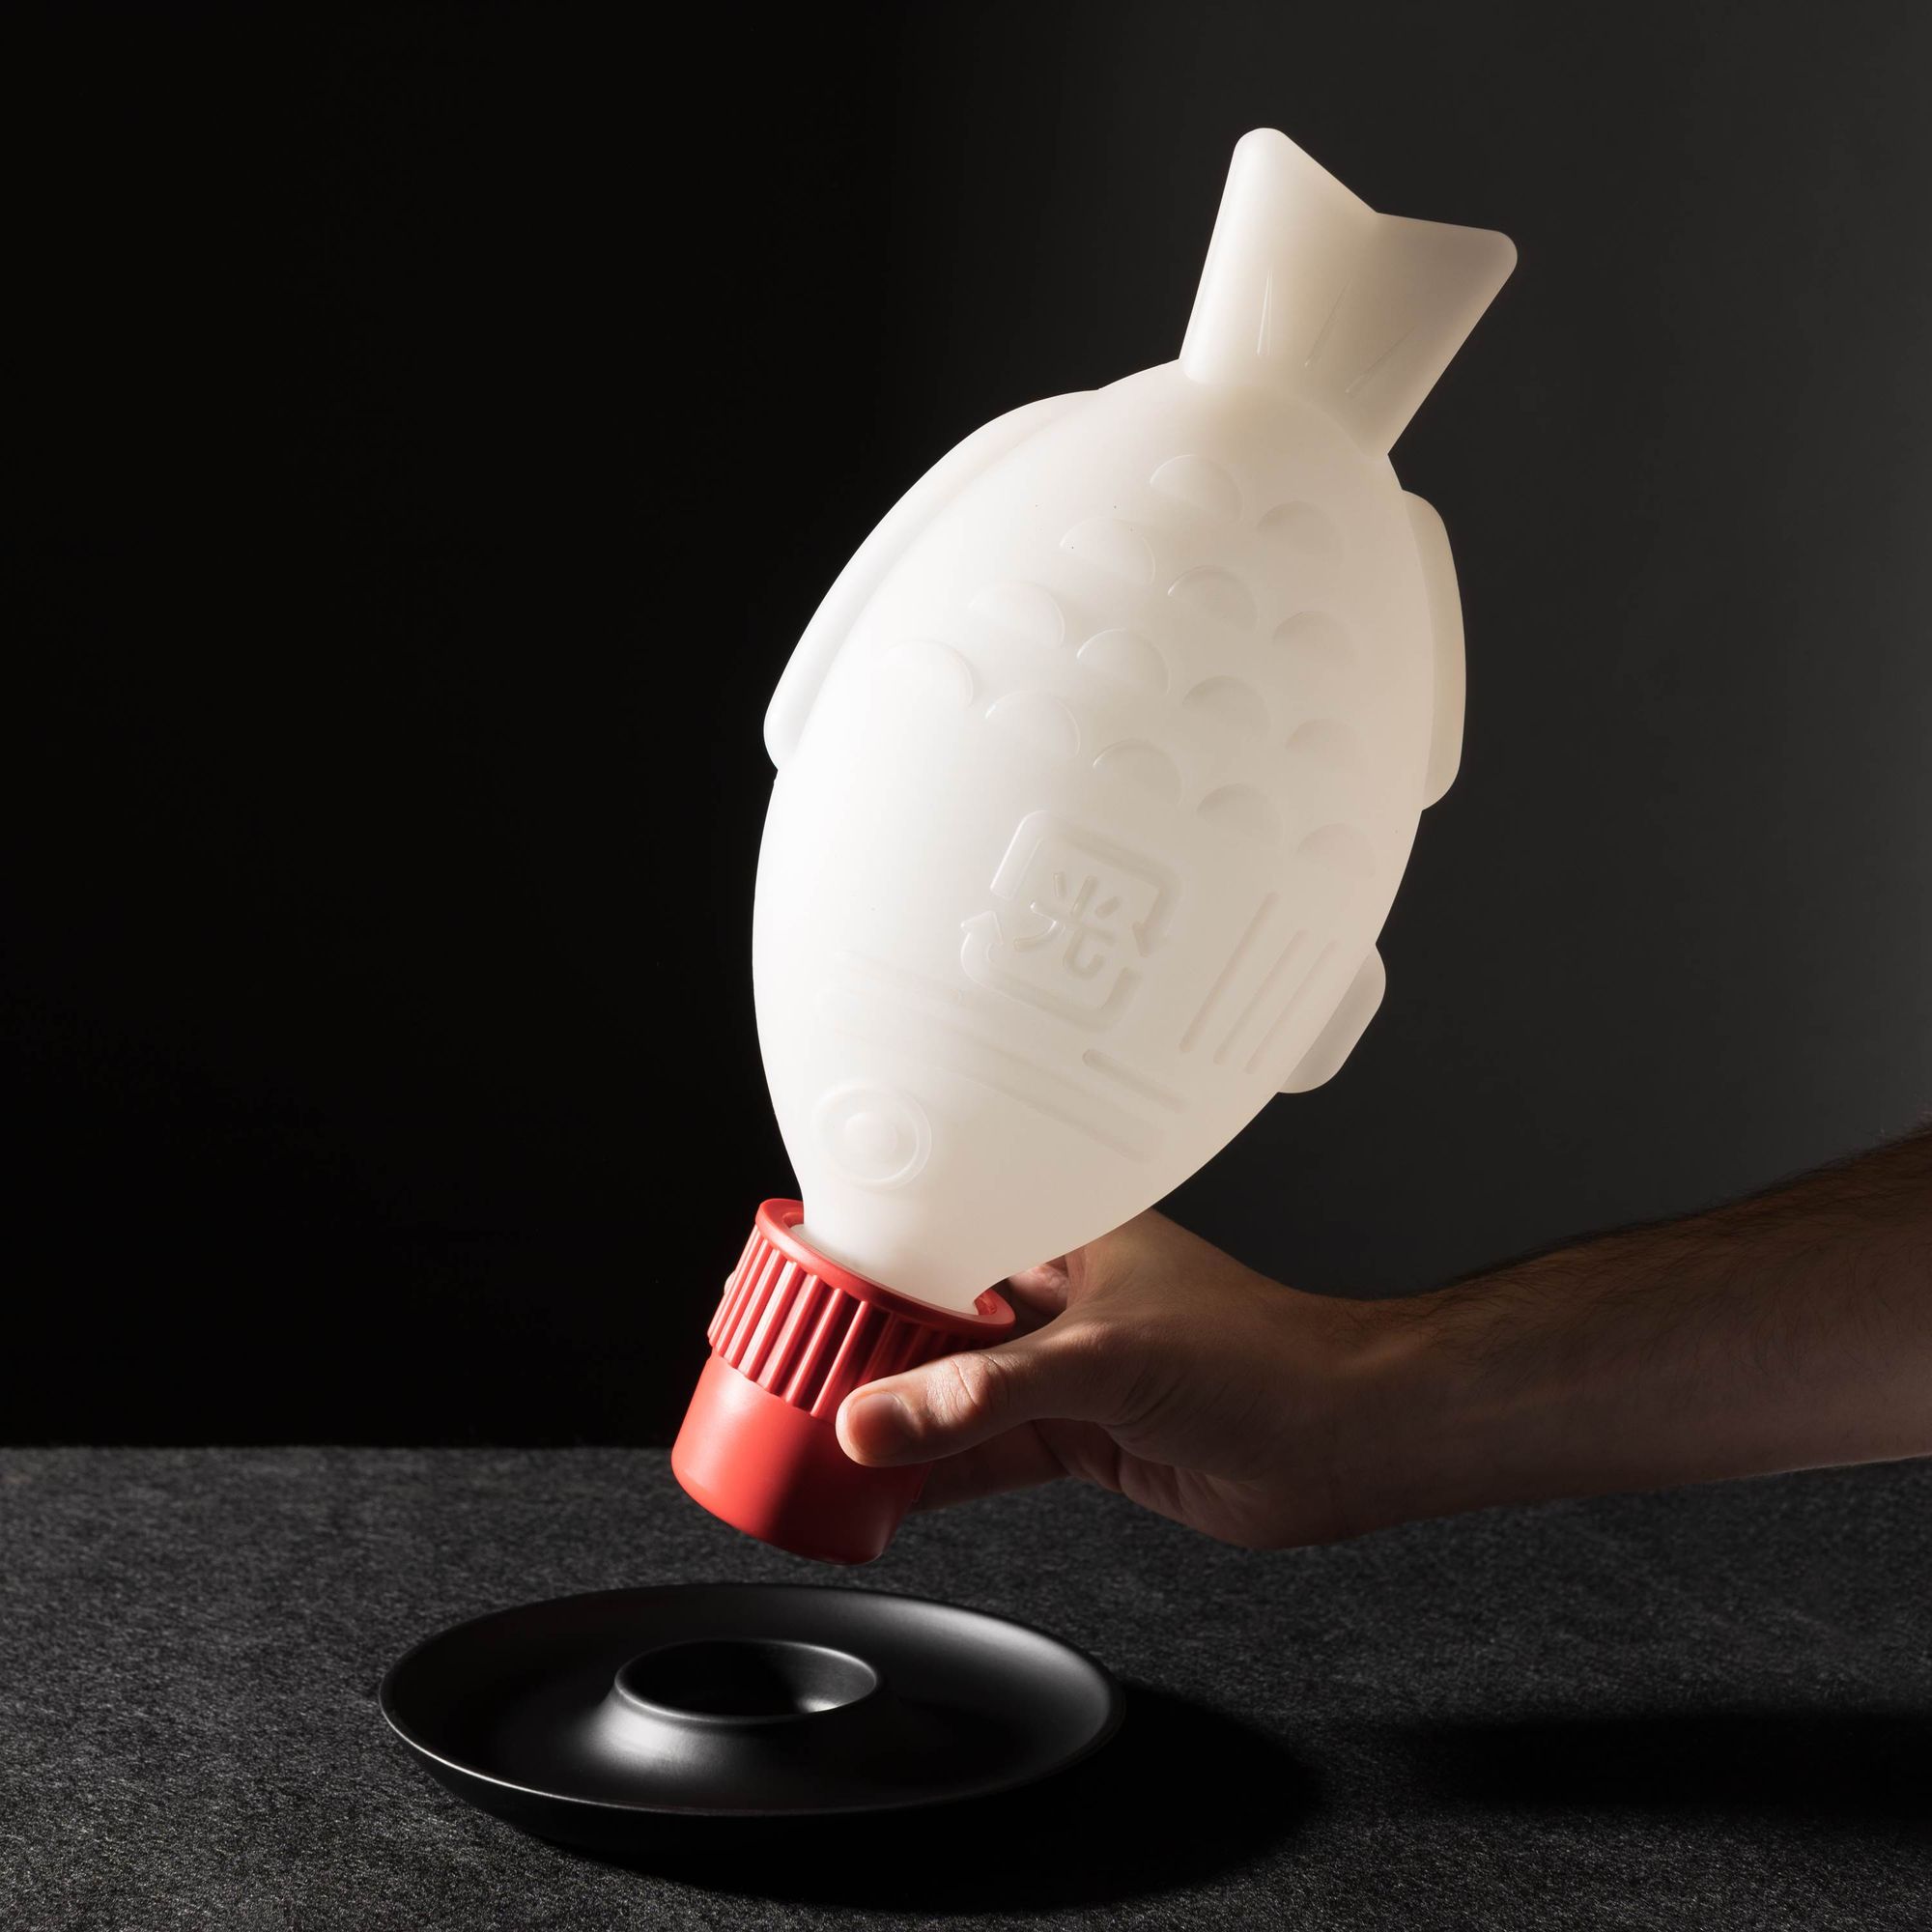 Light Soy by Heliograf showing a person removing the fish shaped lamp from its base plate